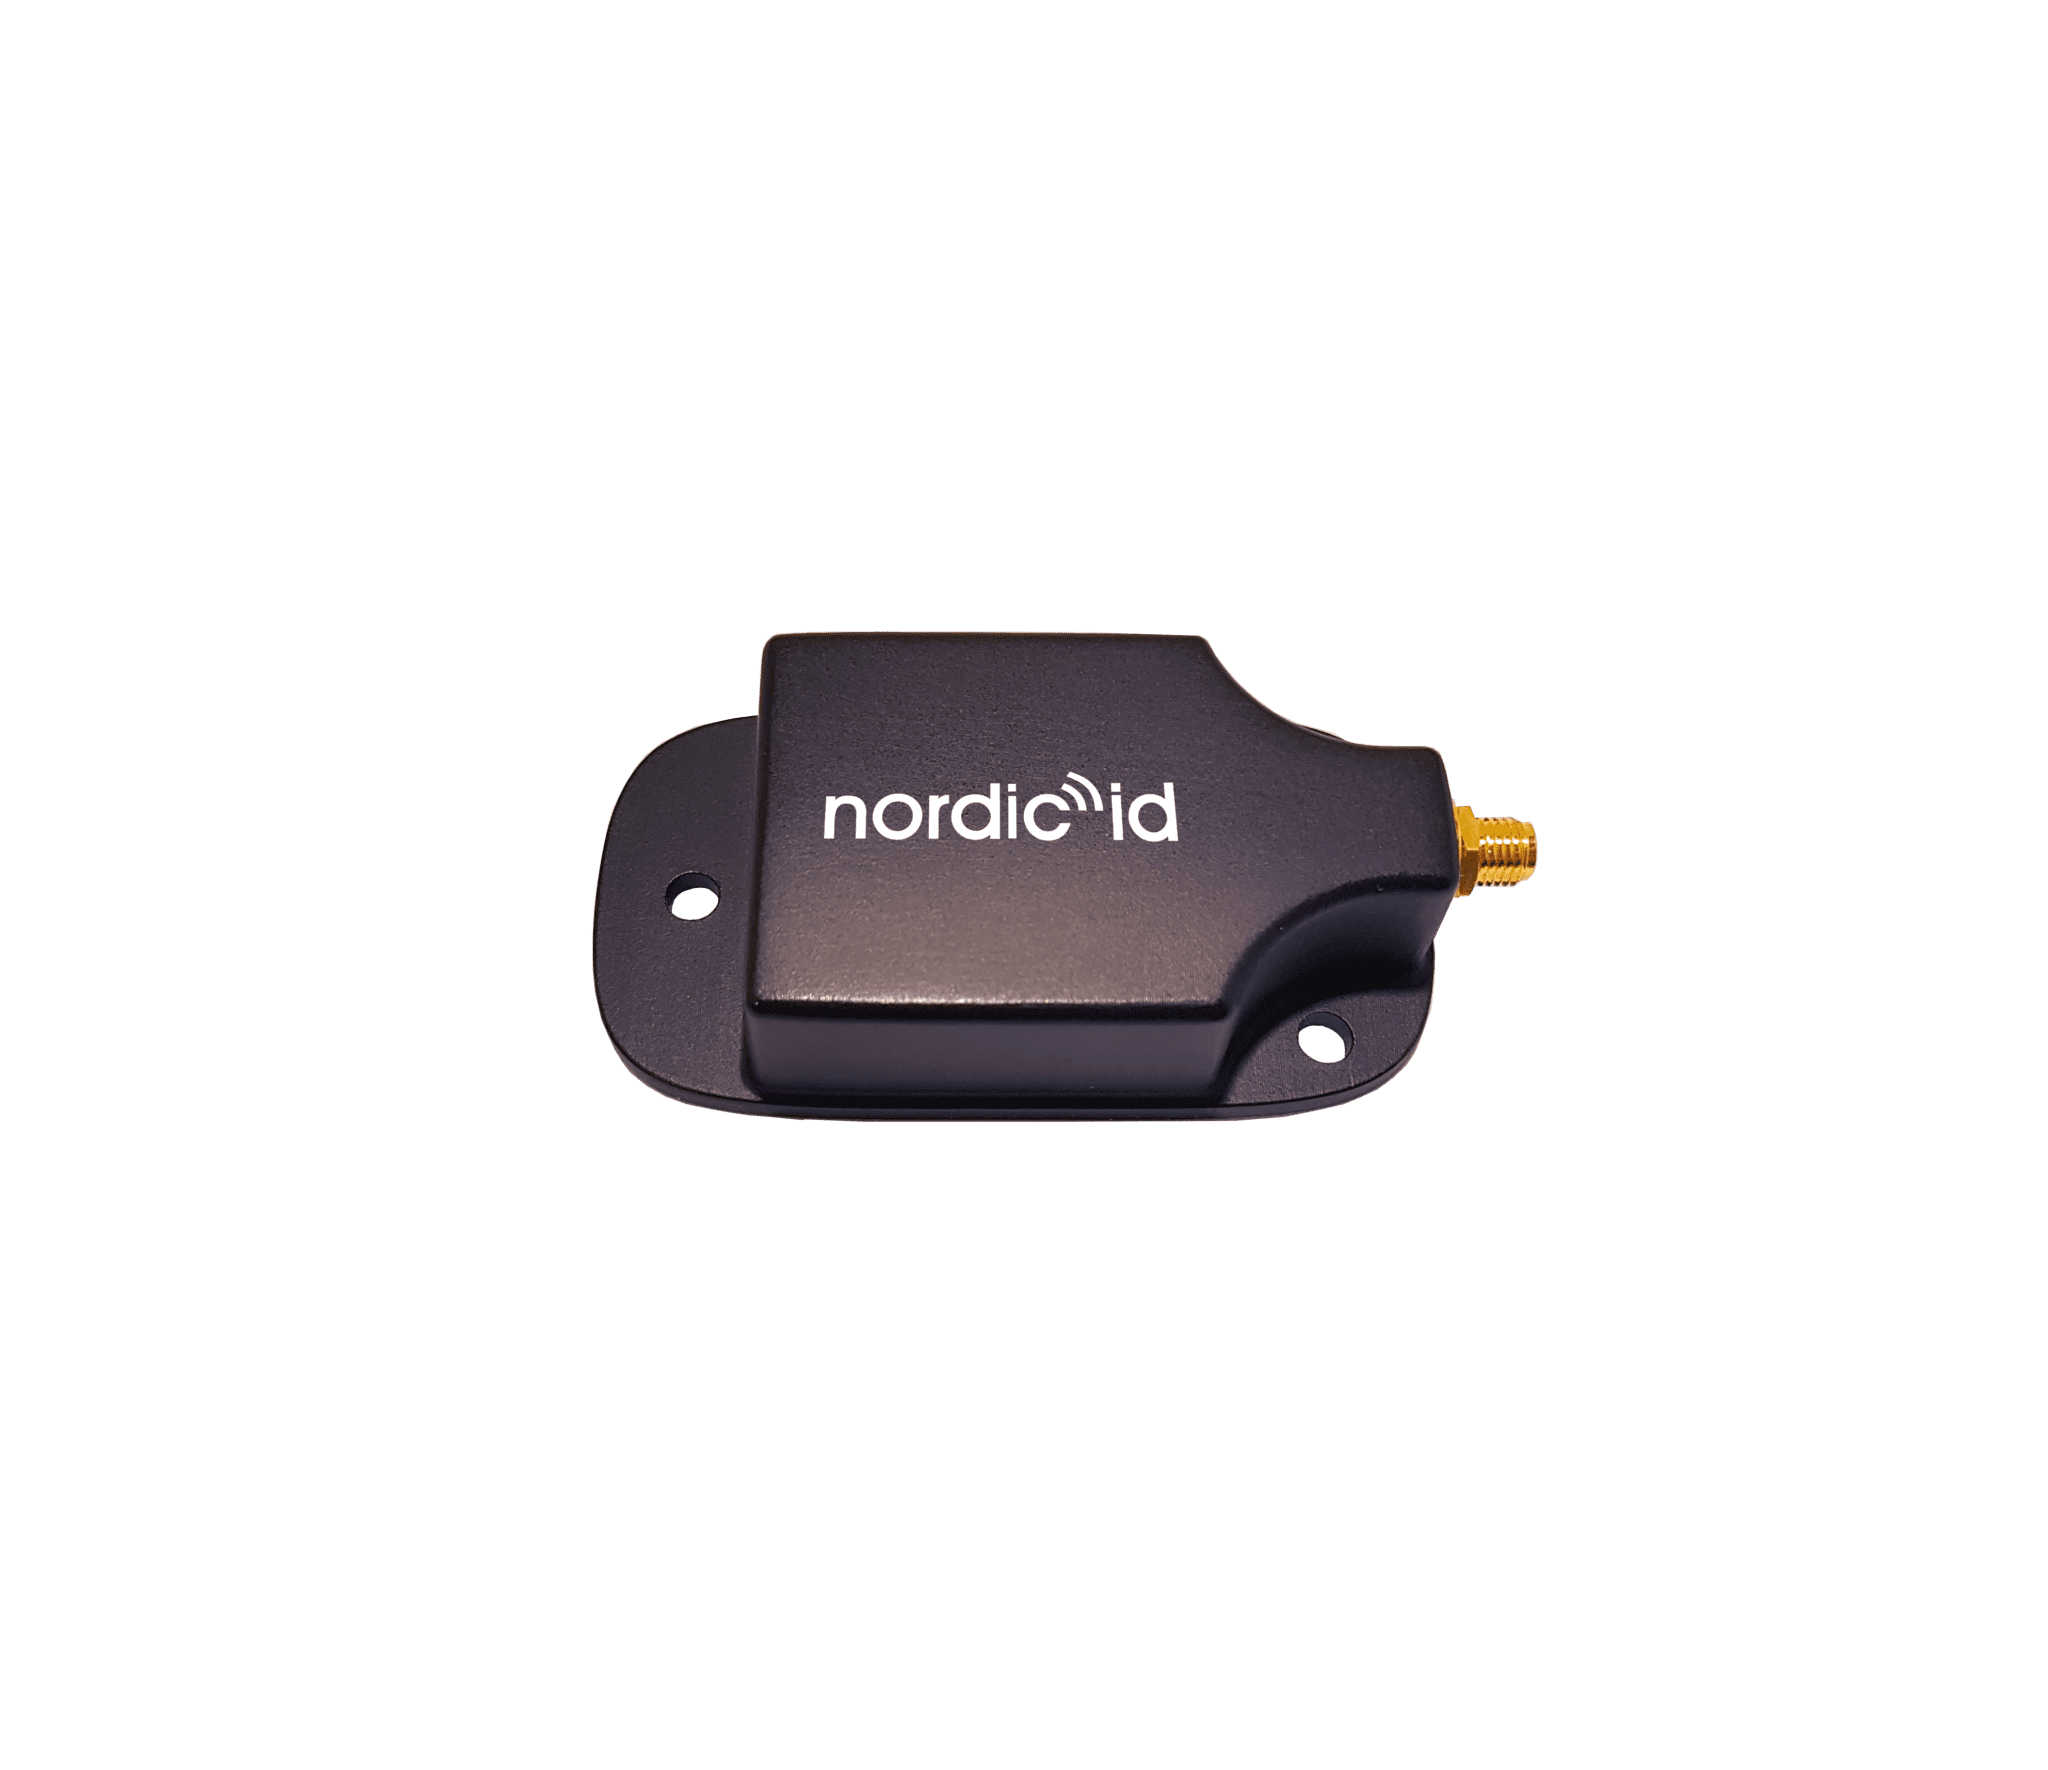 Nordic ID for UHF RFID reading